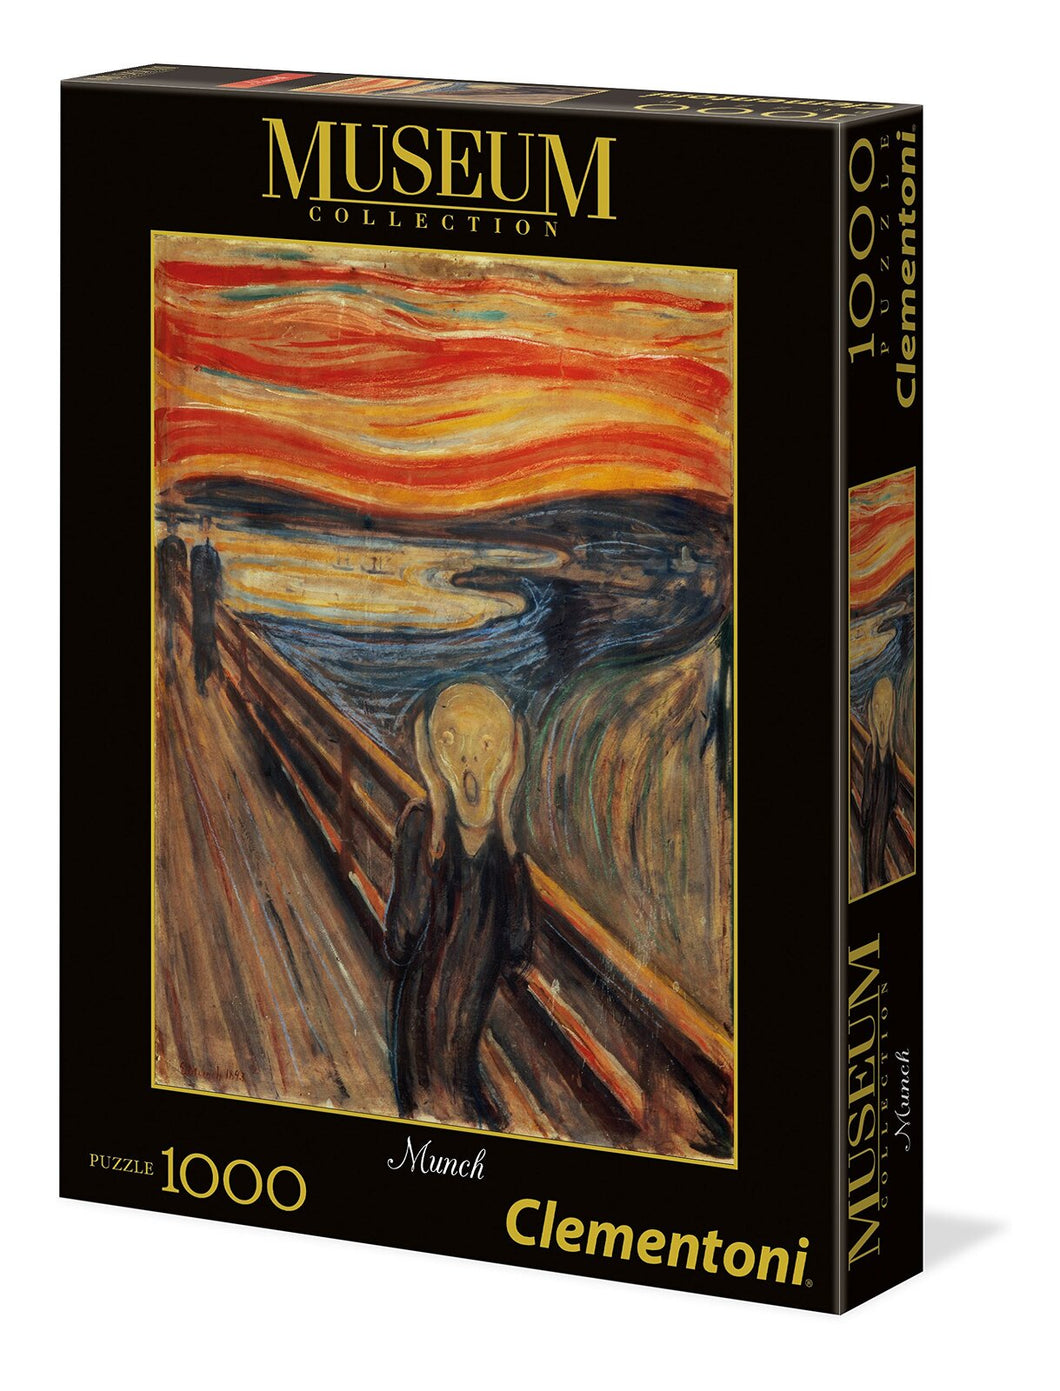 The Scream - Munch - Museum Collection - 1000 Piece Jigsaw Puzzle - Clementoni